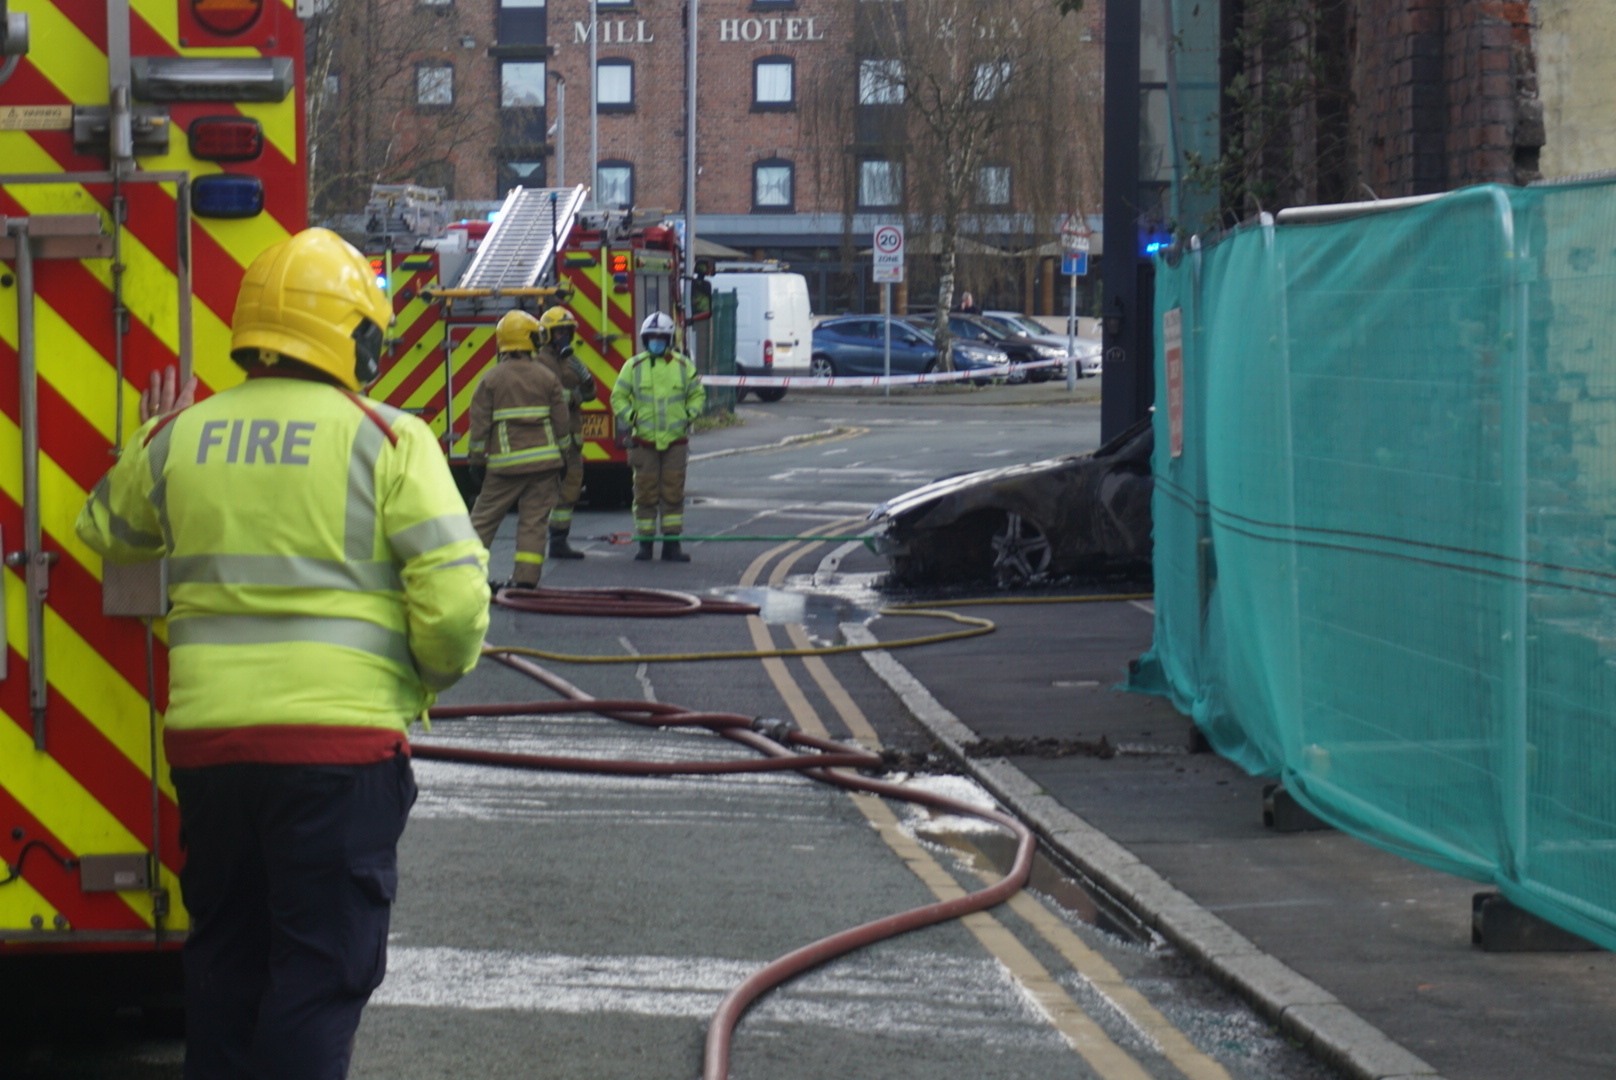 Firefighters at the scene of the garage fire in Charles Street, Chester.